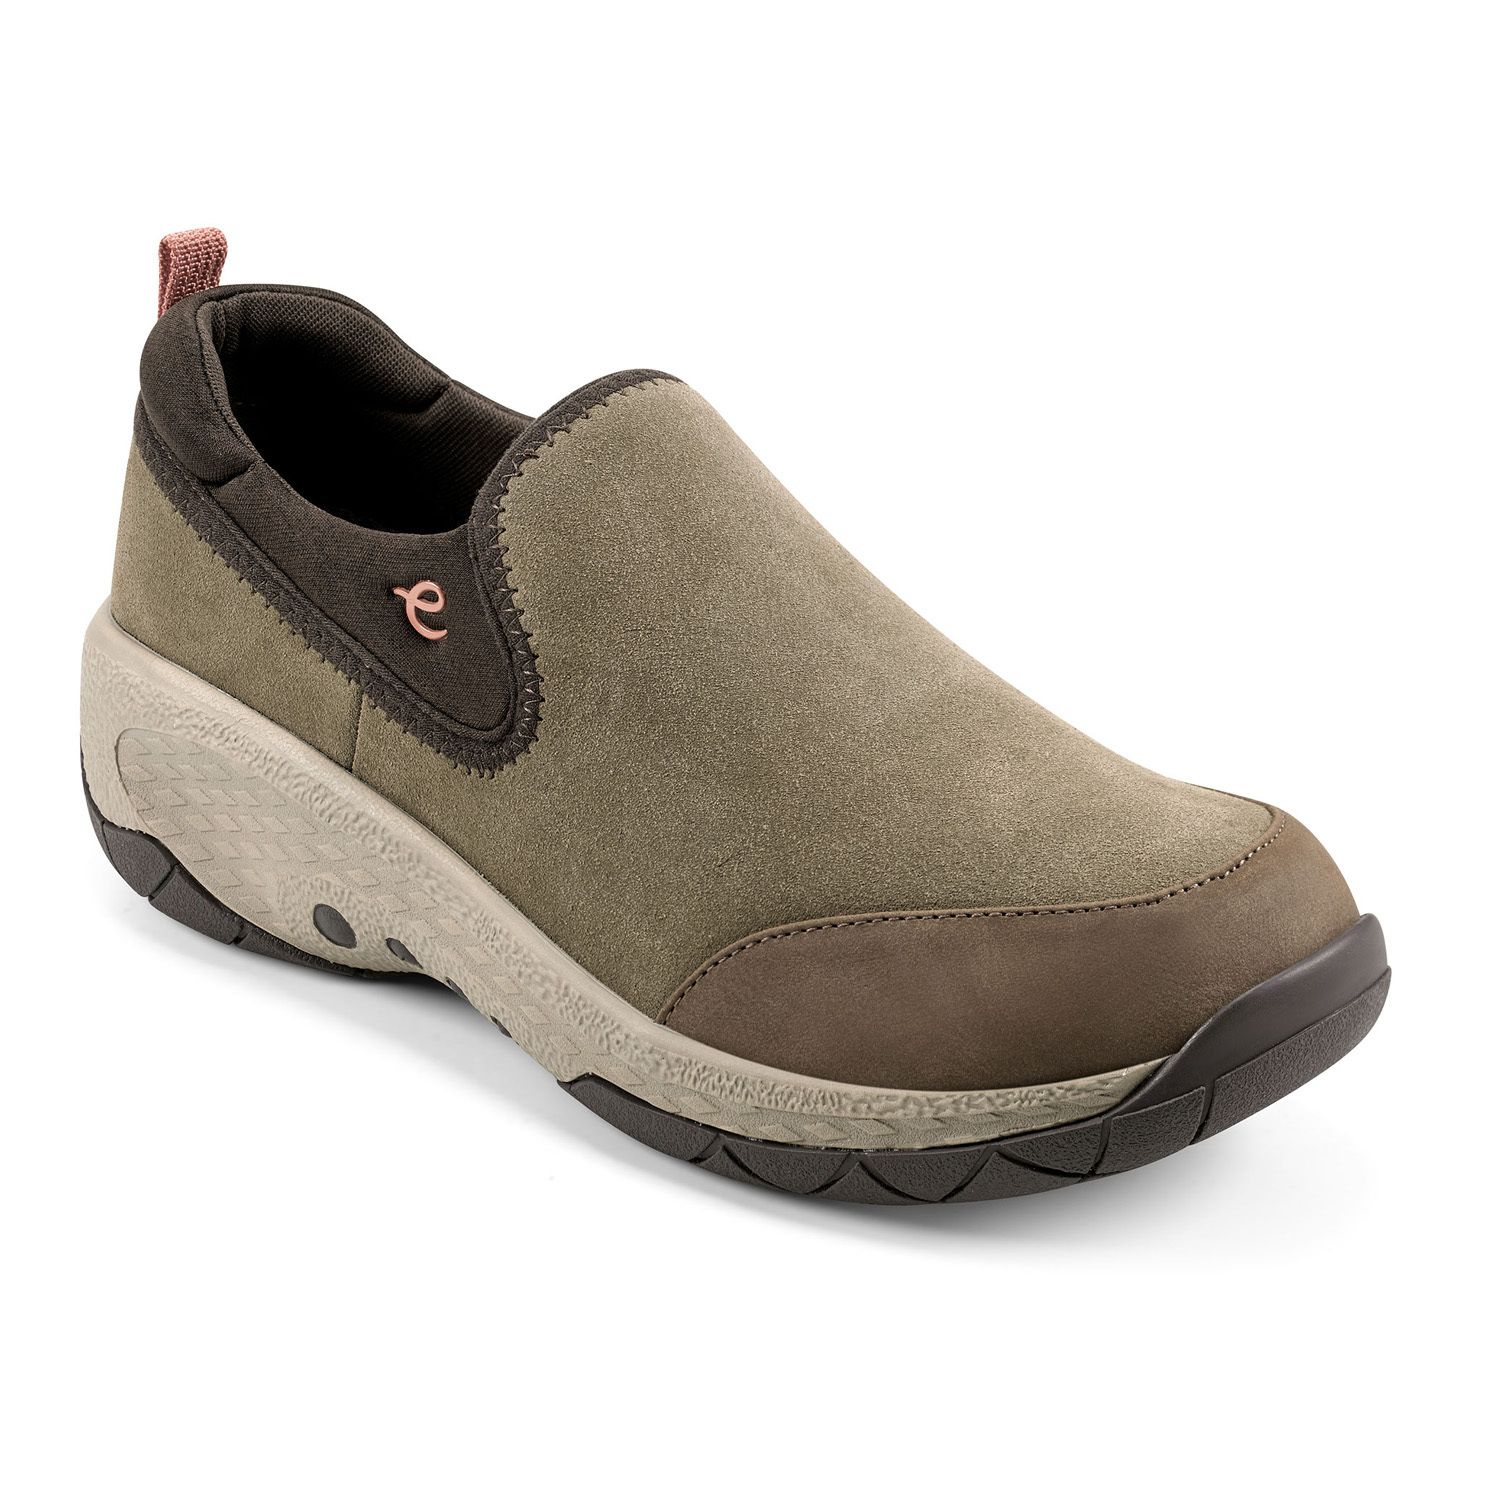 Image for Easy Spirit Jollie Women's Suede Slip-On Sneakers at Kohl's.